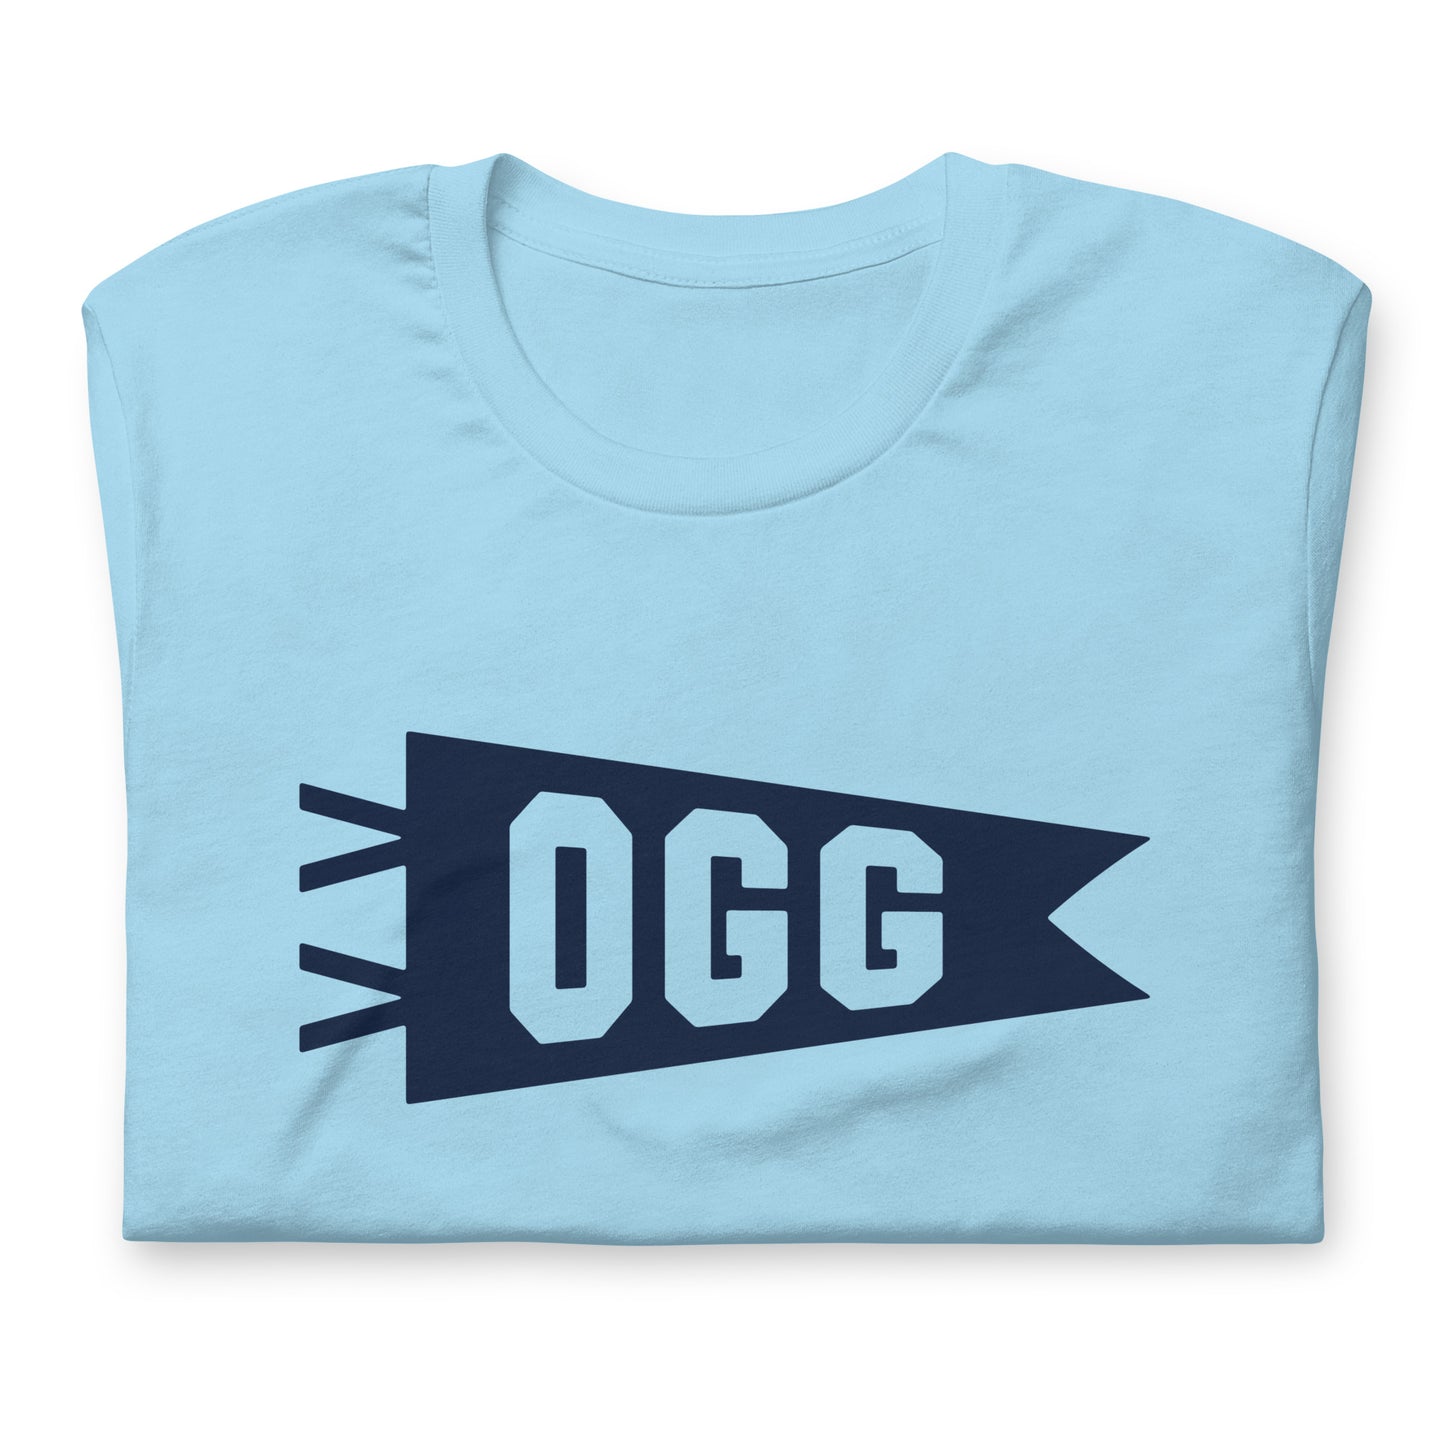 Airport Code T-Shirt - Navy Blue Graphic • OGG Maui • YHM Designs - Image 06